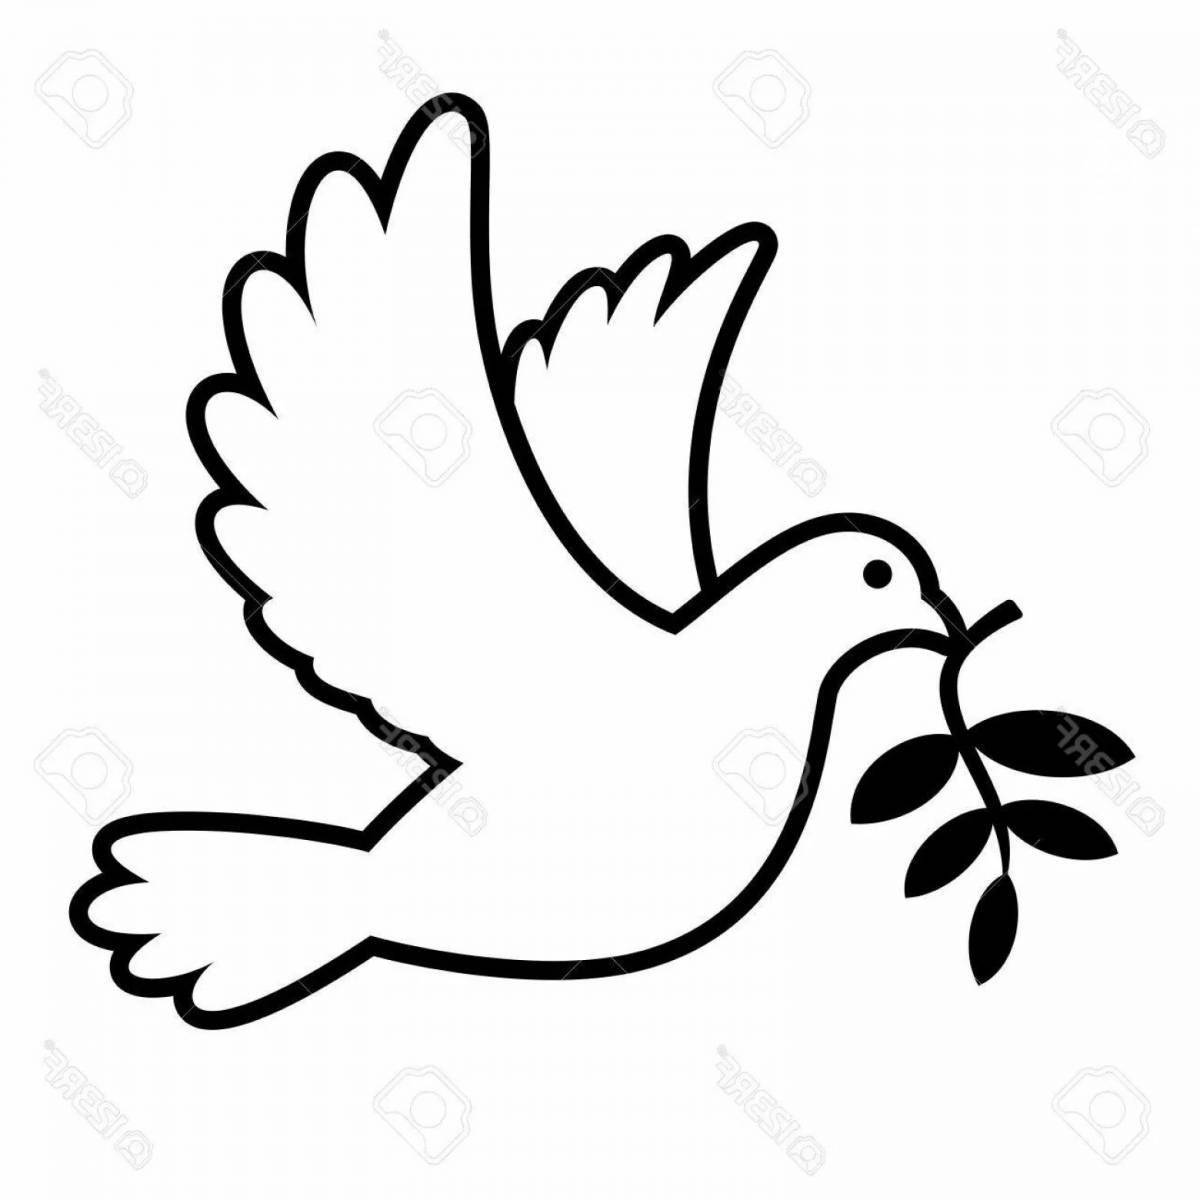 Awesome dove of peace coloring page for kids